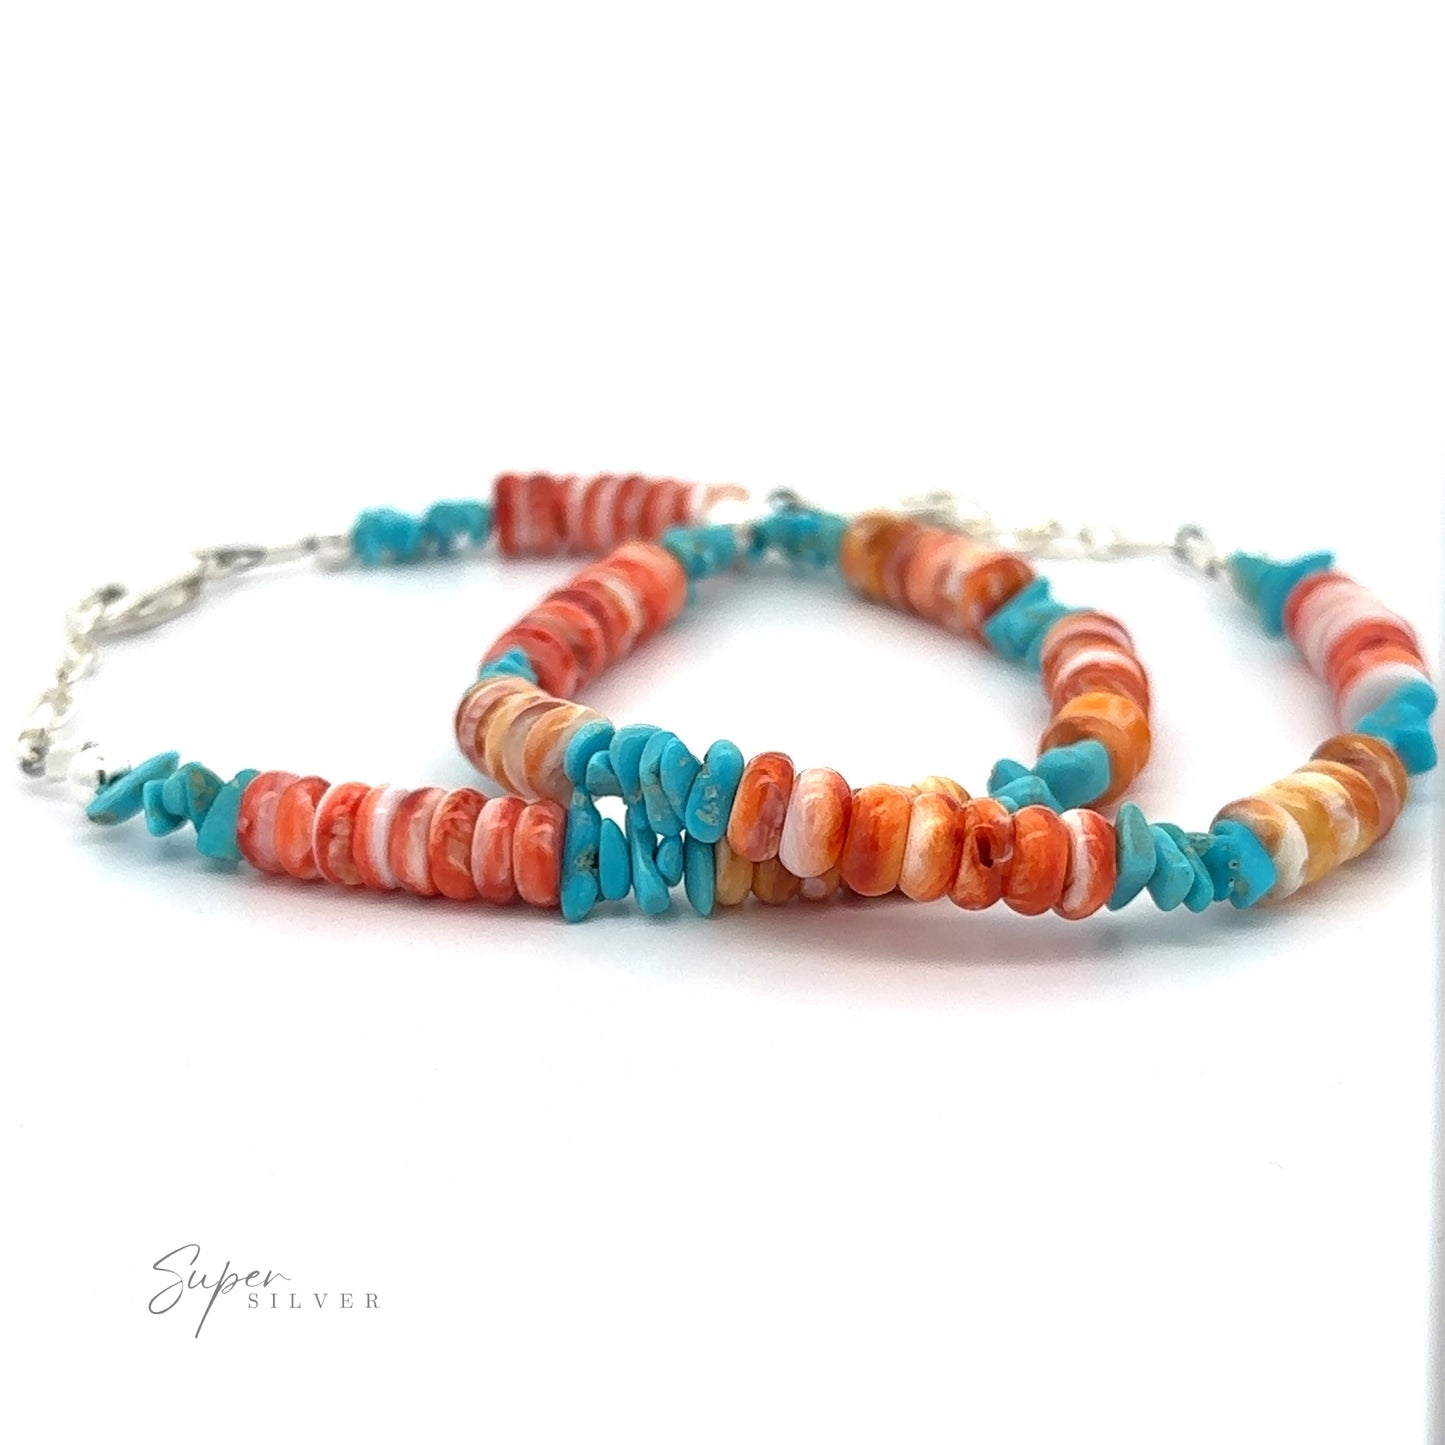 Native American Turquoise and Spiny Oyster Shell Bracelet with alternating turquoise and spiny oyster shell beads, linked by a silver chain, displayed against a white background.